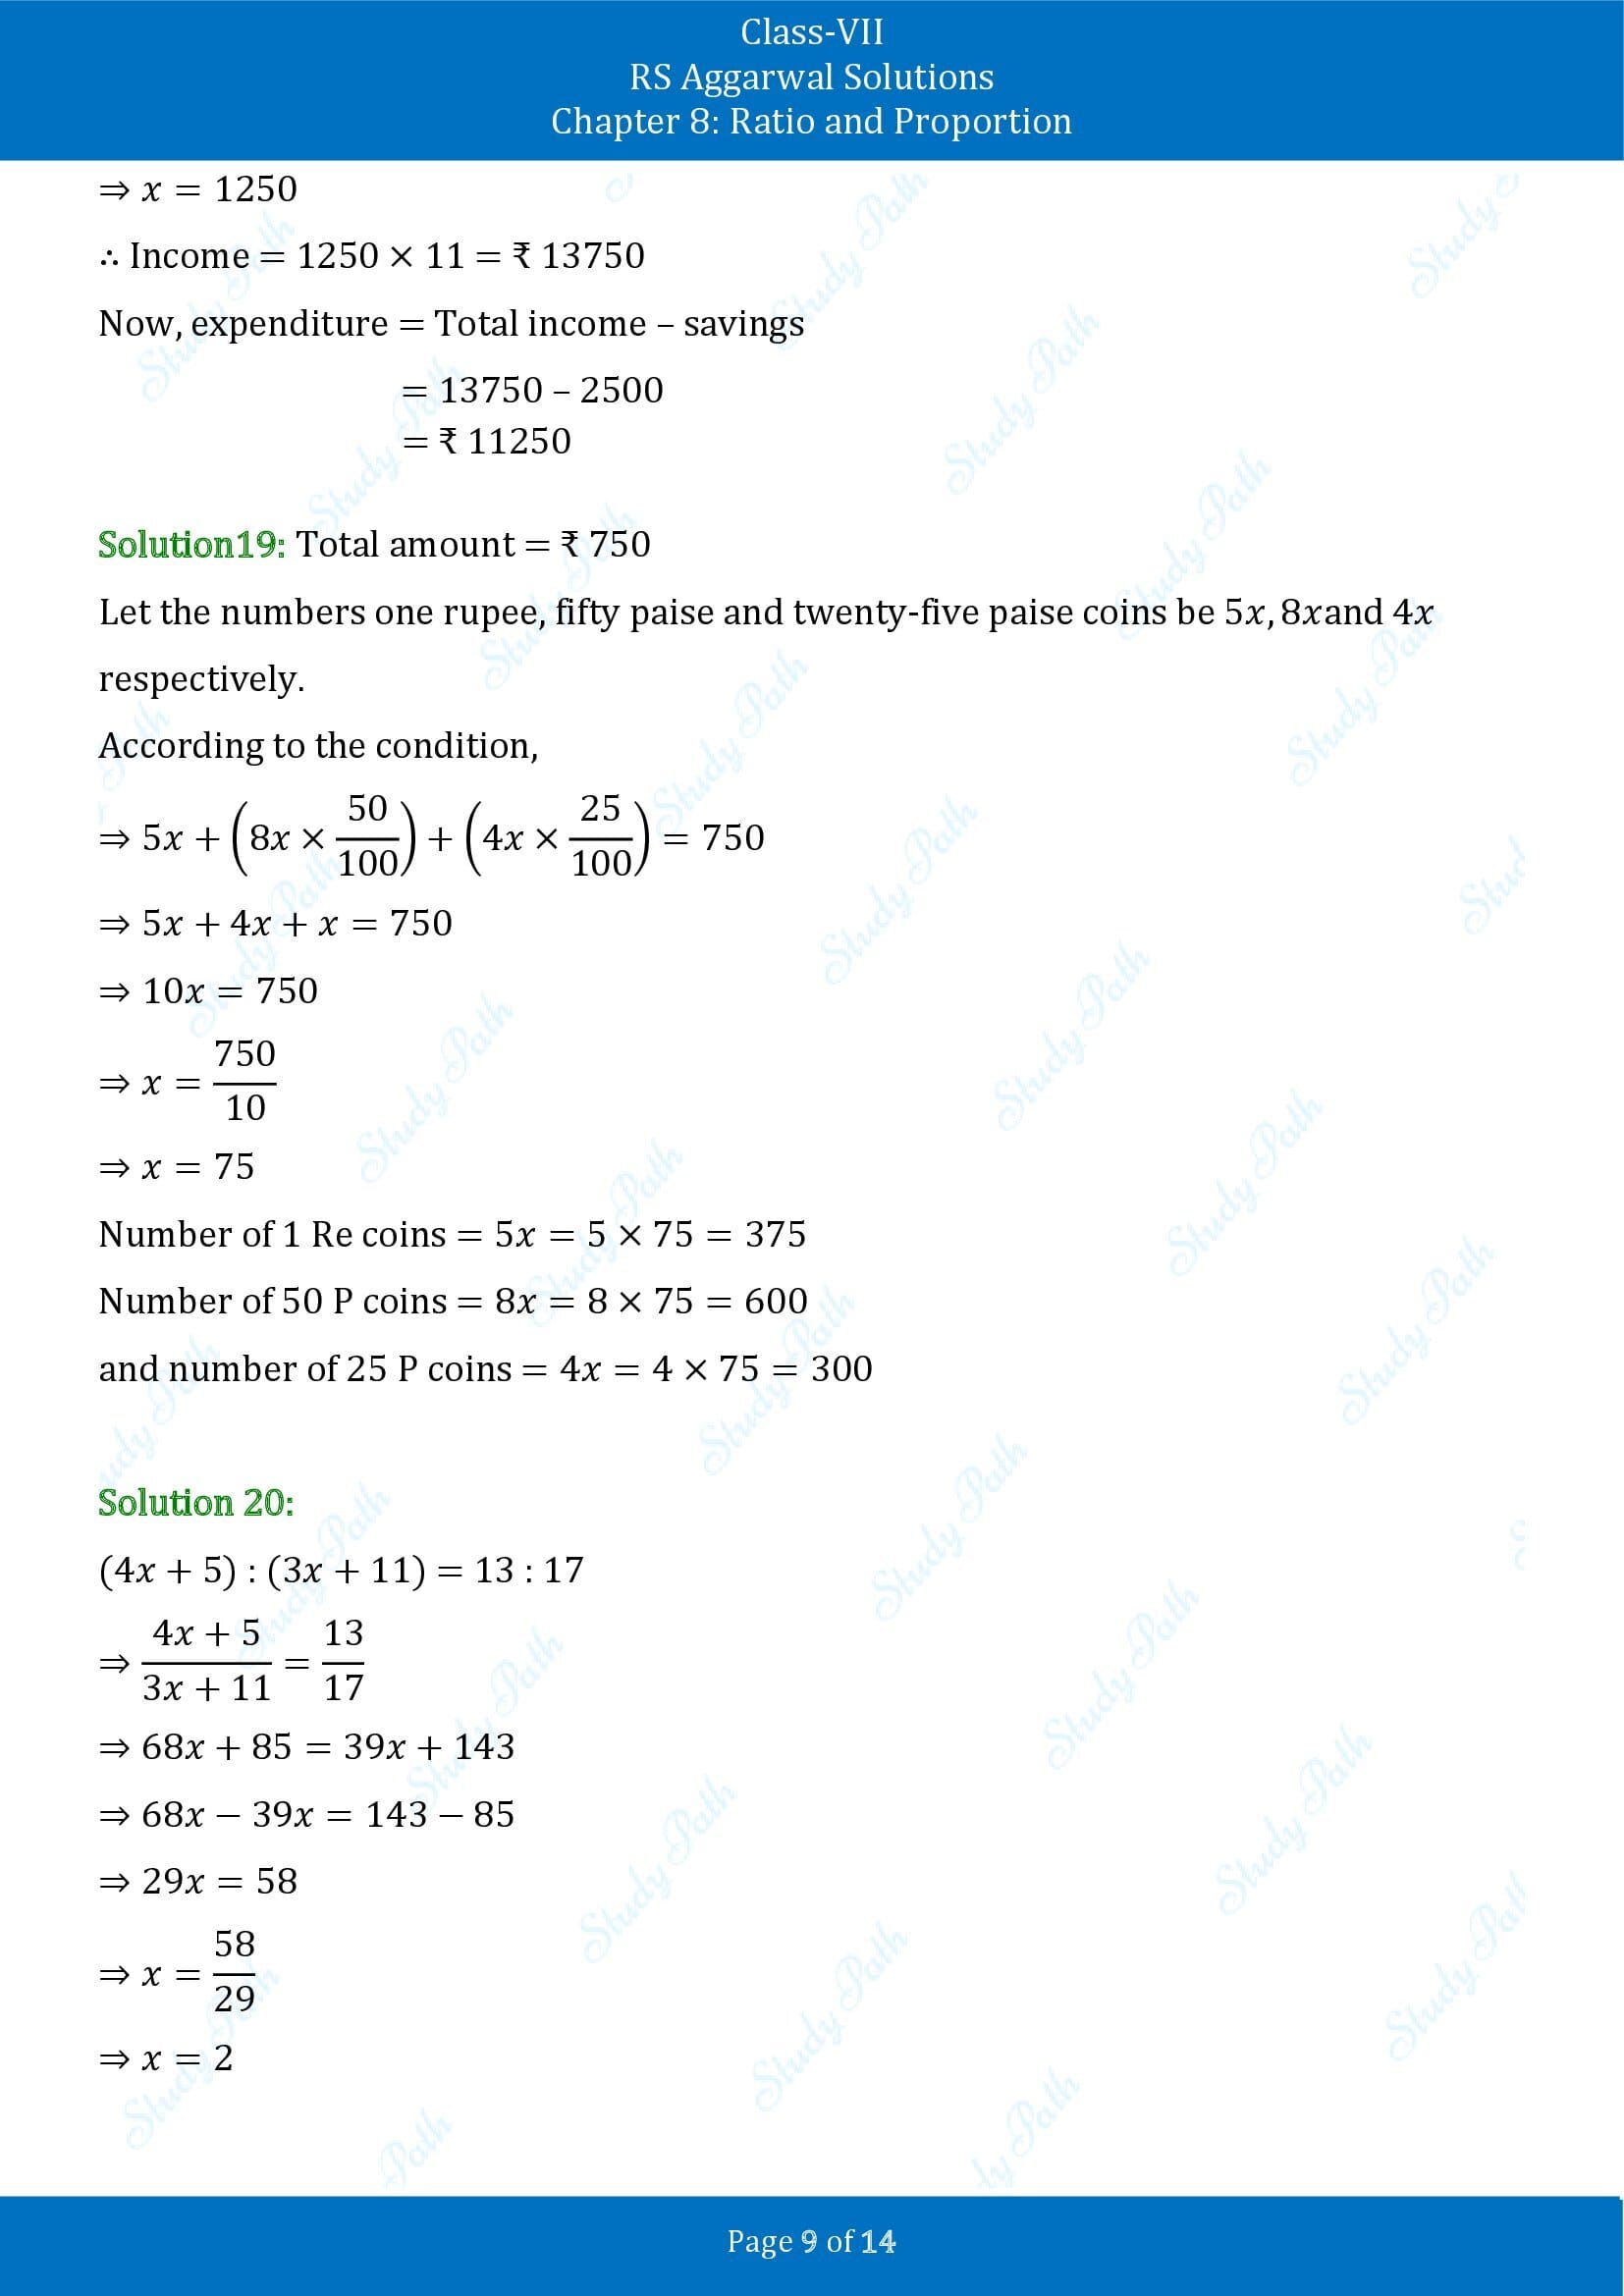 RS Aggarwal Solutions Class 7 Chapter 8 Ratio and Proportion Exercise 8A 00009